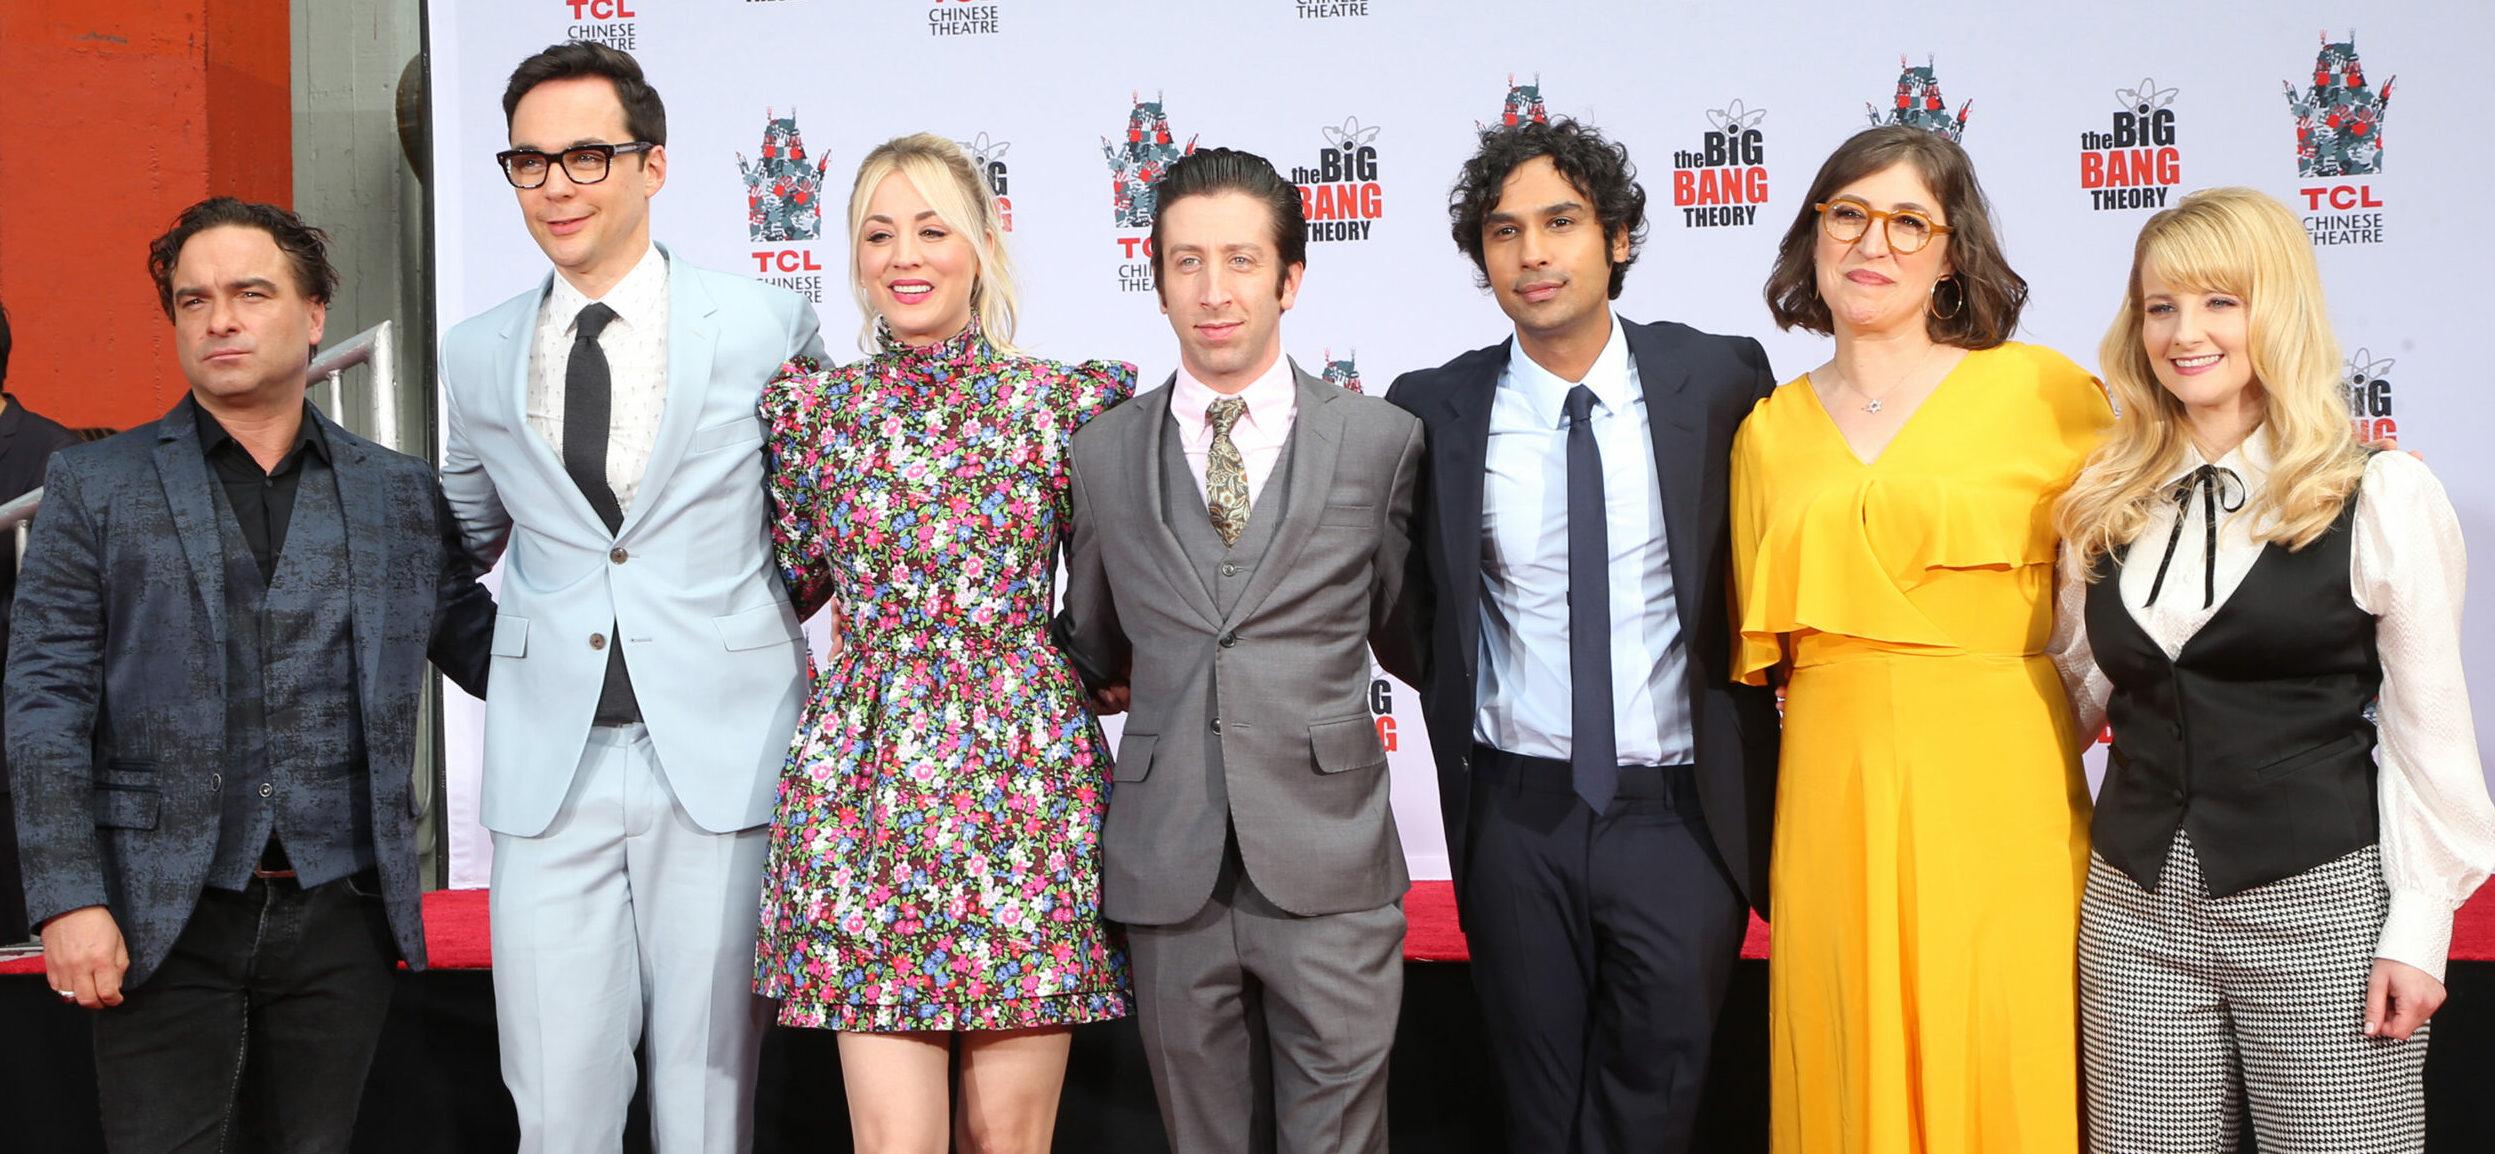 Johnny Galecki, Jim Parsons, Kaley Cuoco, Simon Helberg, Kunal Nayyar, Mayim Bialik, and Melissa Rauch. The Cast Of "The Big Bang Theory" Places Their Handprints In The Cement held at TCL Chinese Theatre IMAX.